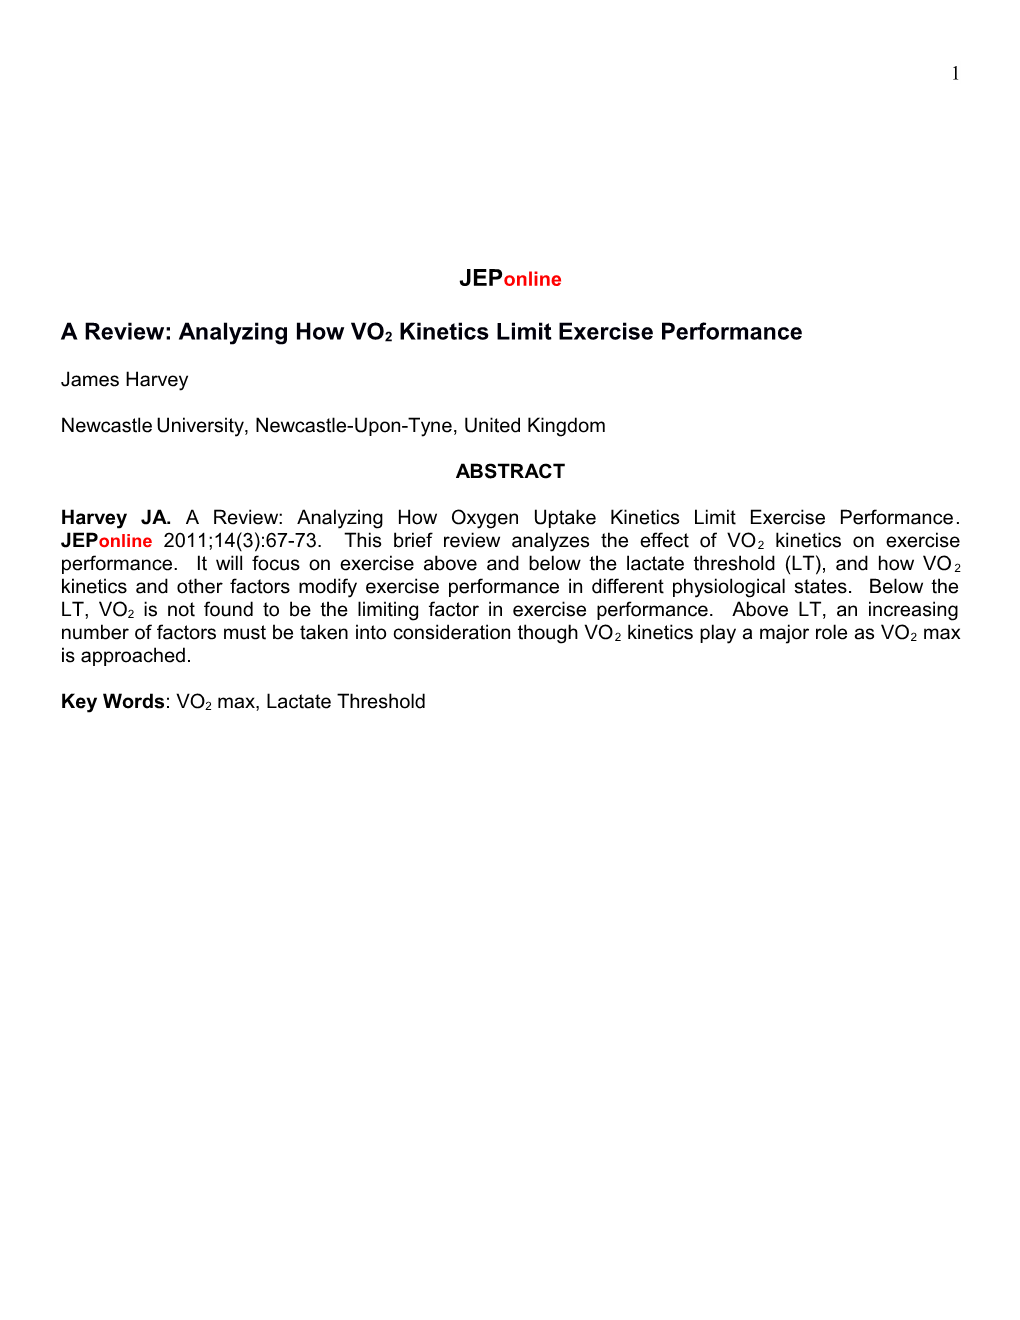 A Review: Analyzing How VO2 Kinetics Limit Exercise Performance